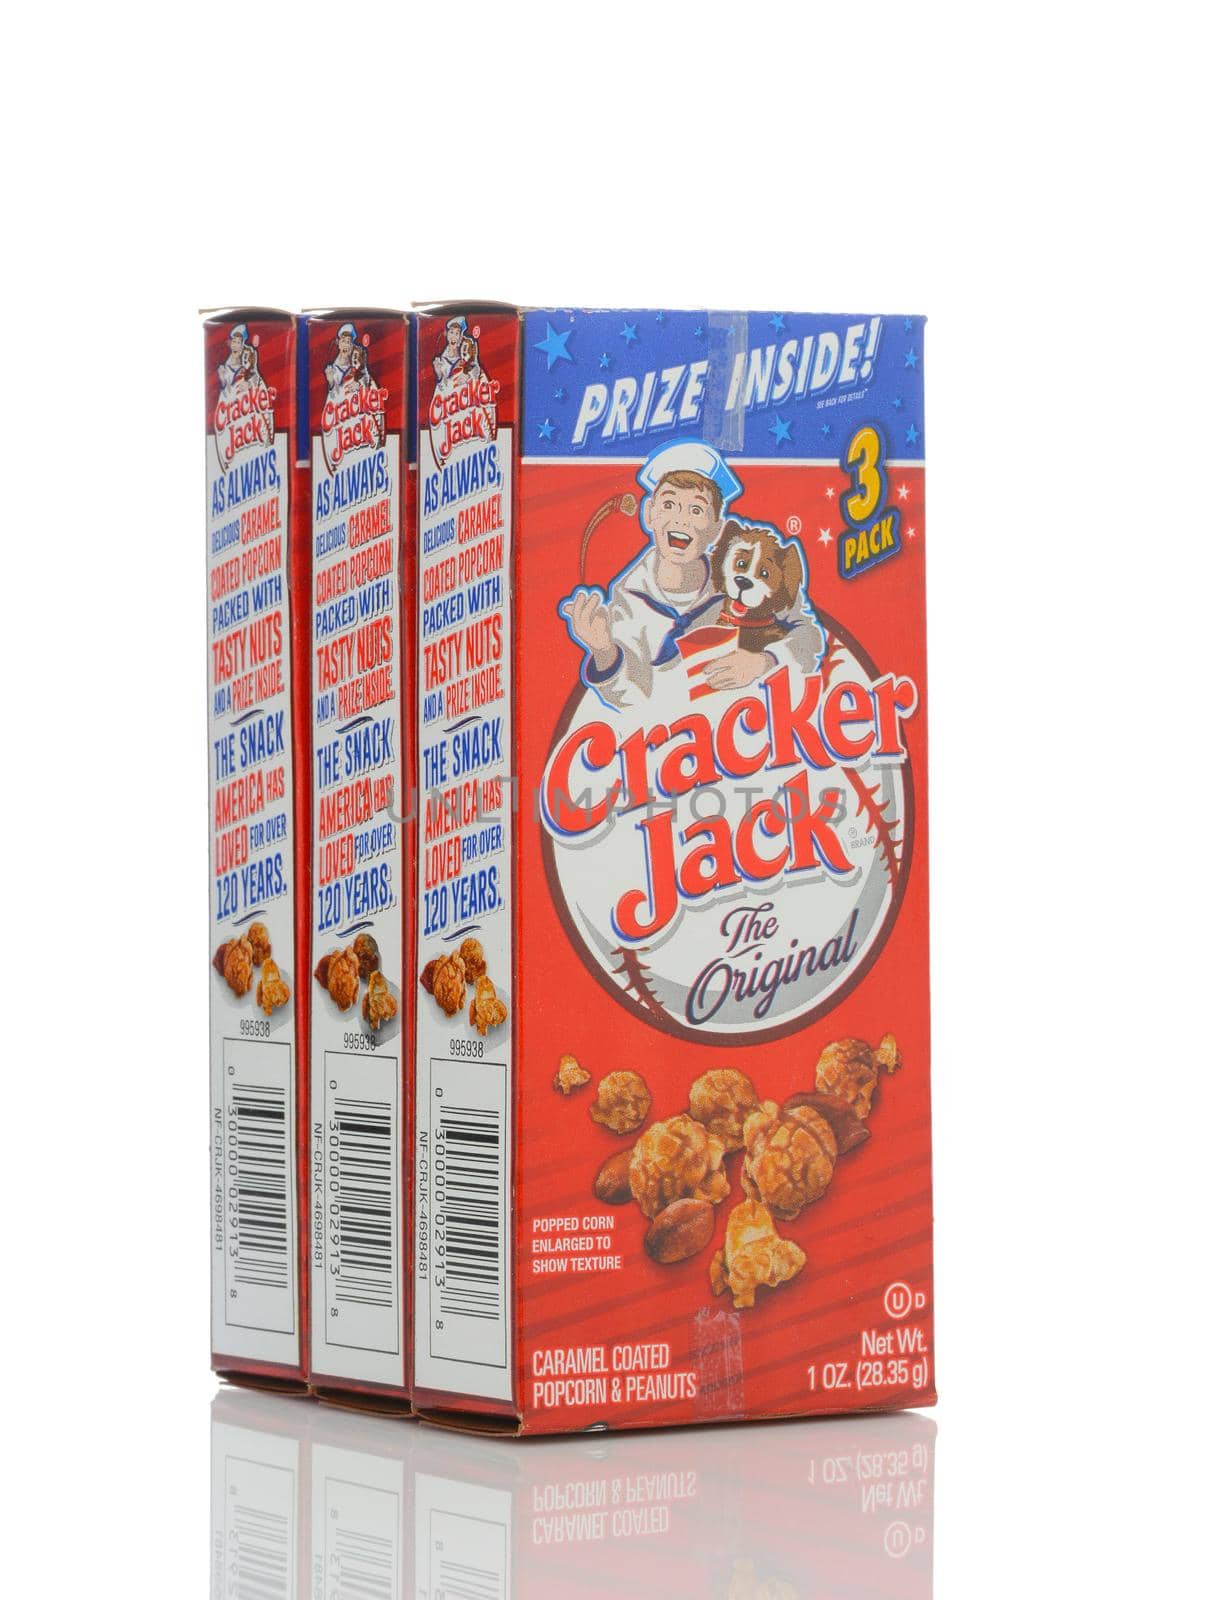 Three pack of Cracker Jack snack consisting of molasses flavored, candy coated, popcorn and peanuts by sCukrov